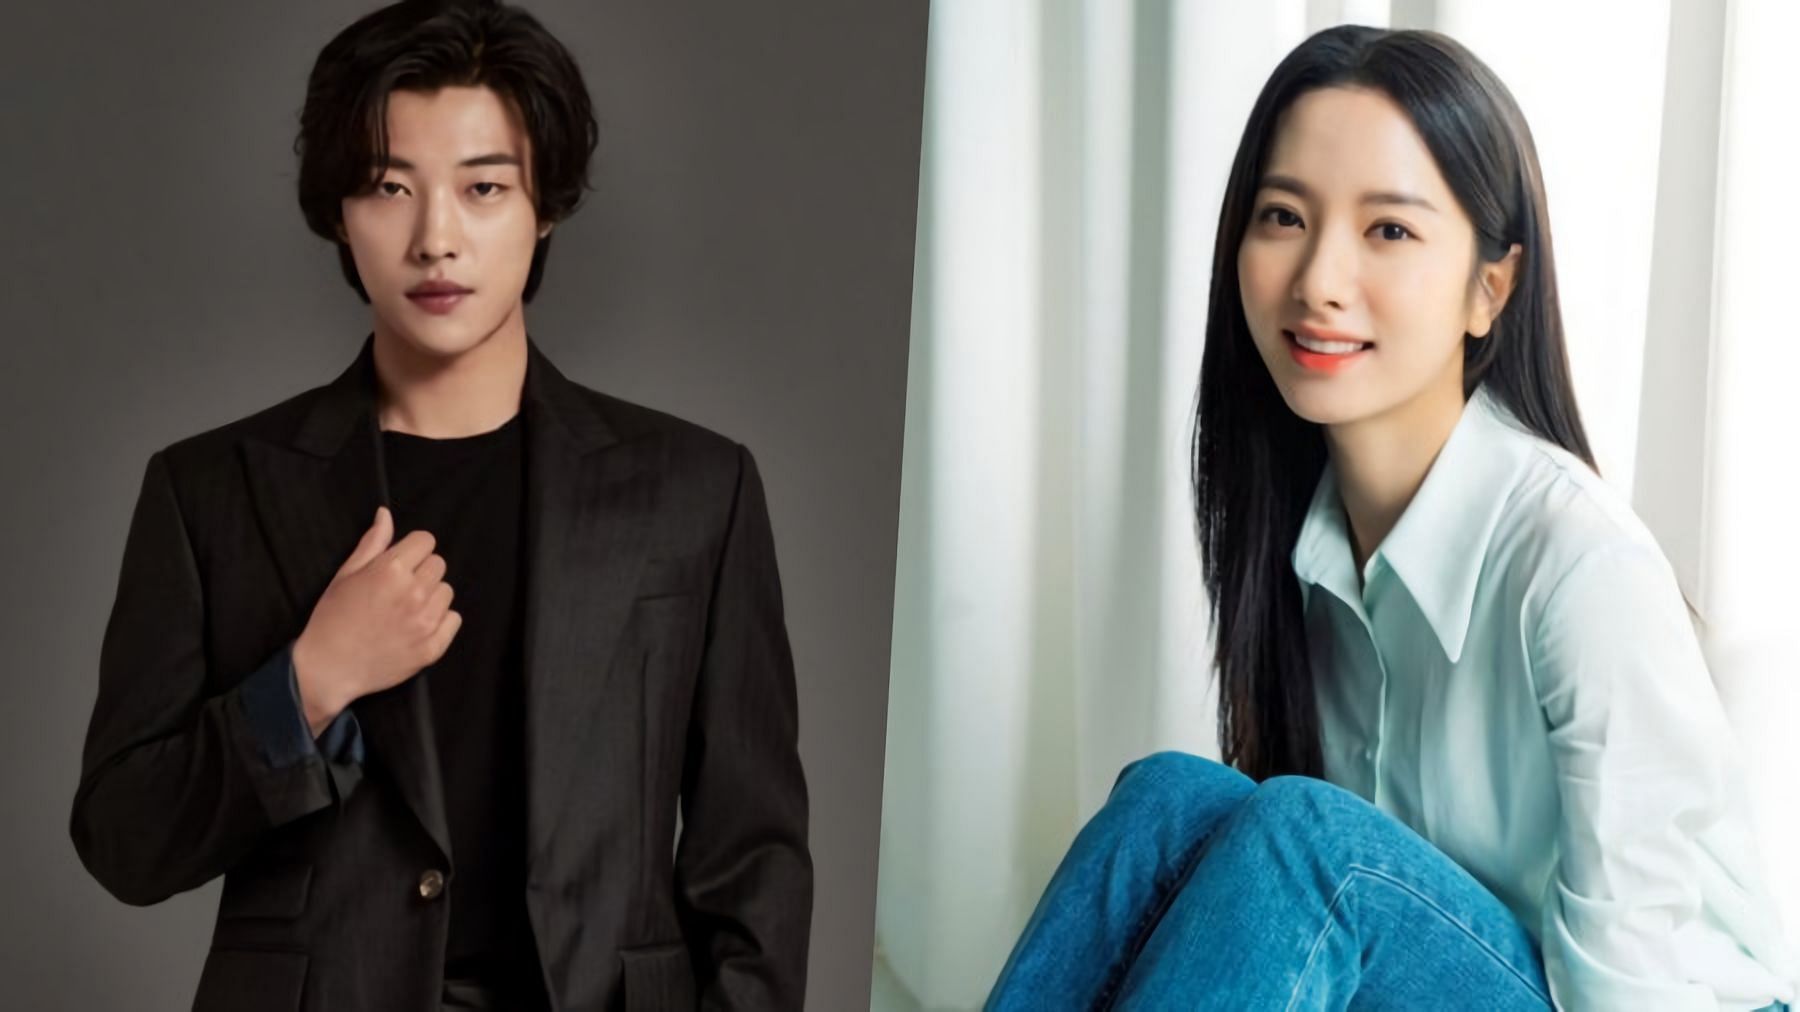 The pair will be cast together for the first time (Image via KingKong and KeyEast)